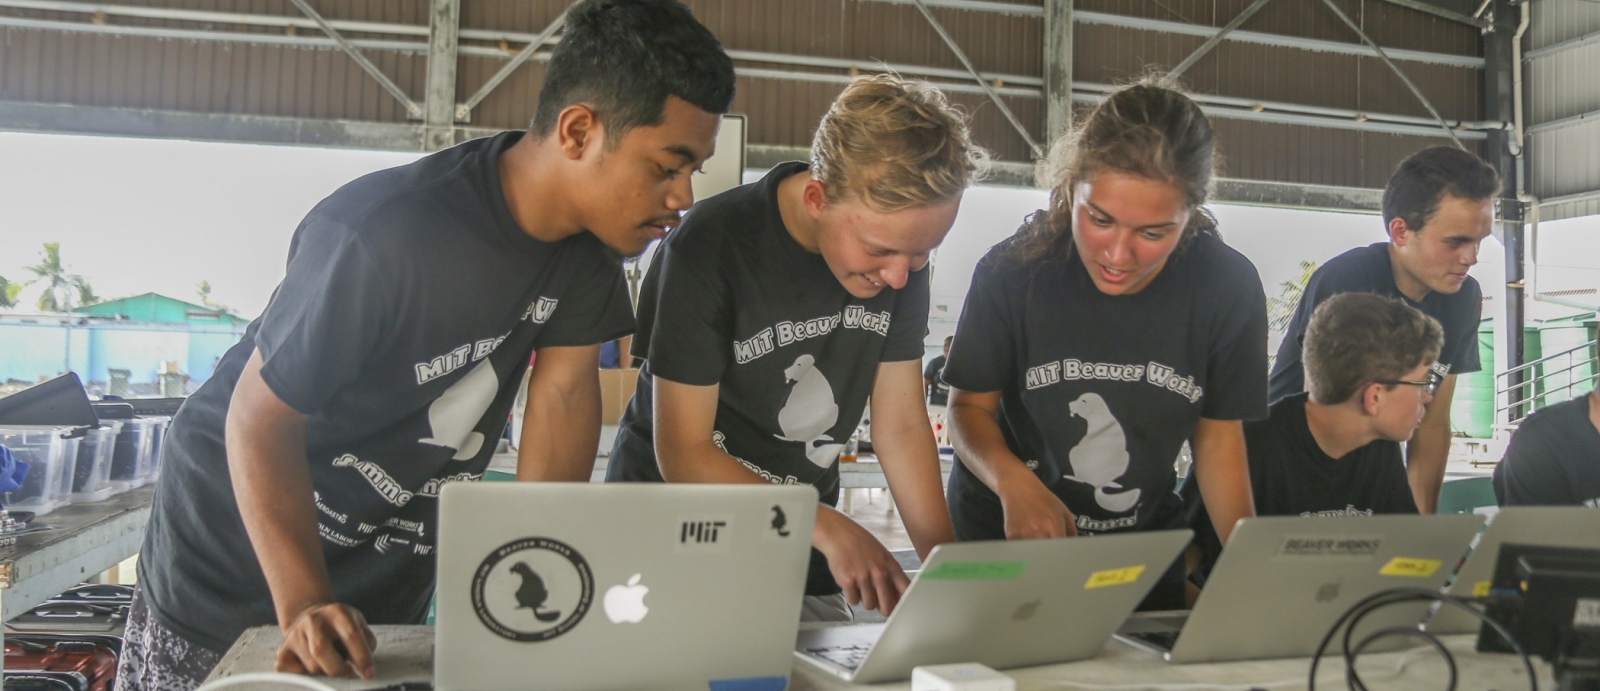 Three students stand together at a table, looking down each at a laptop, discussing. Two other students are in the background. The building they are in looks like an aircraft hanger. 